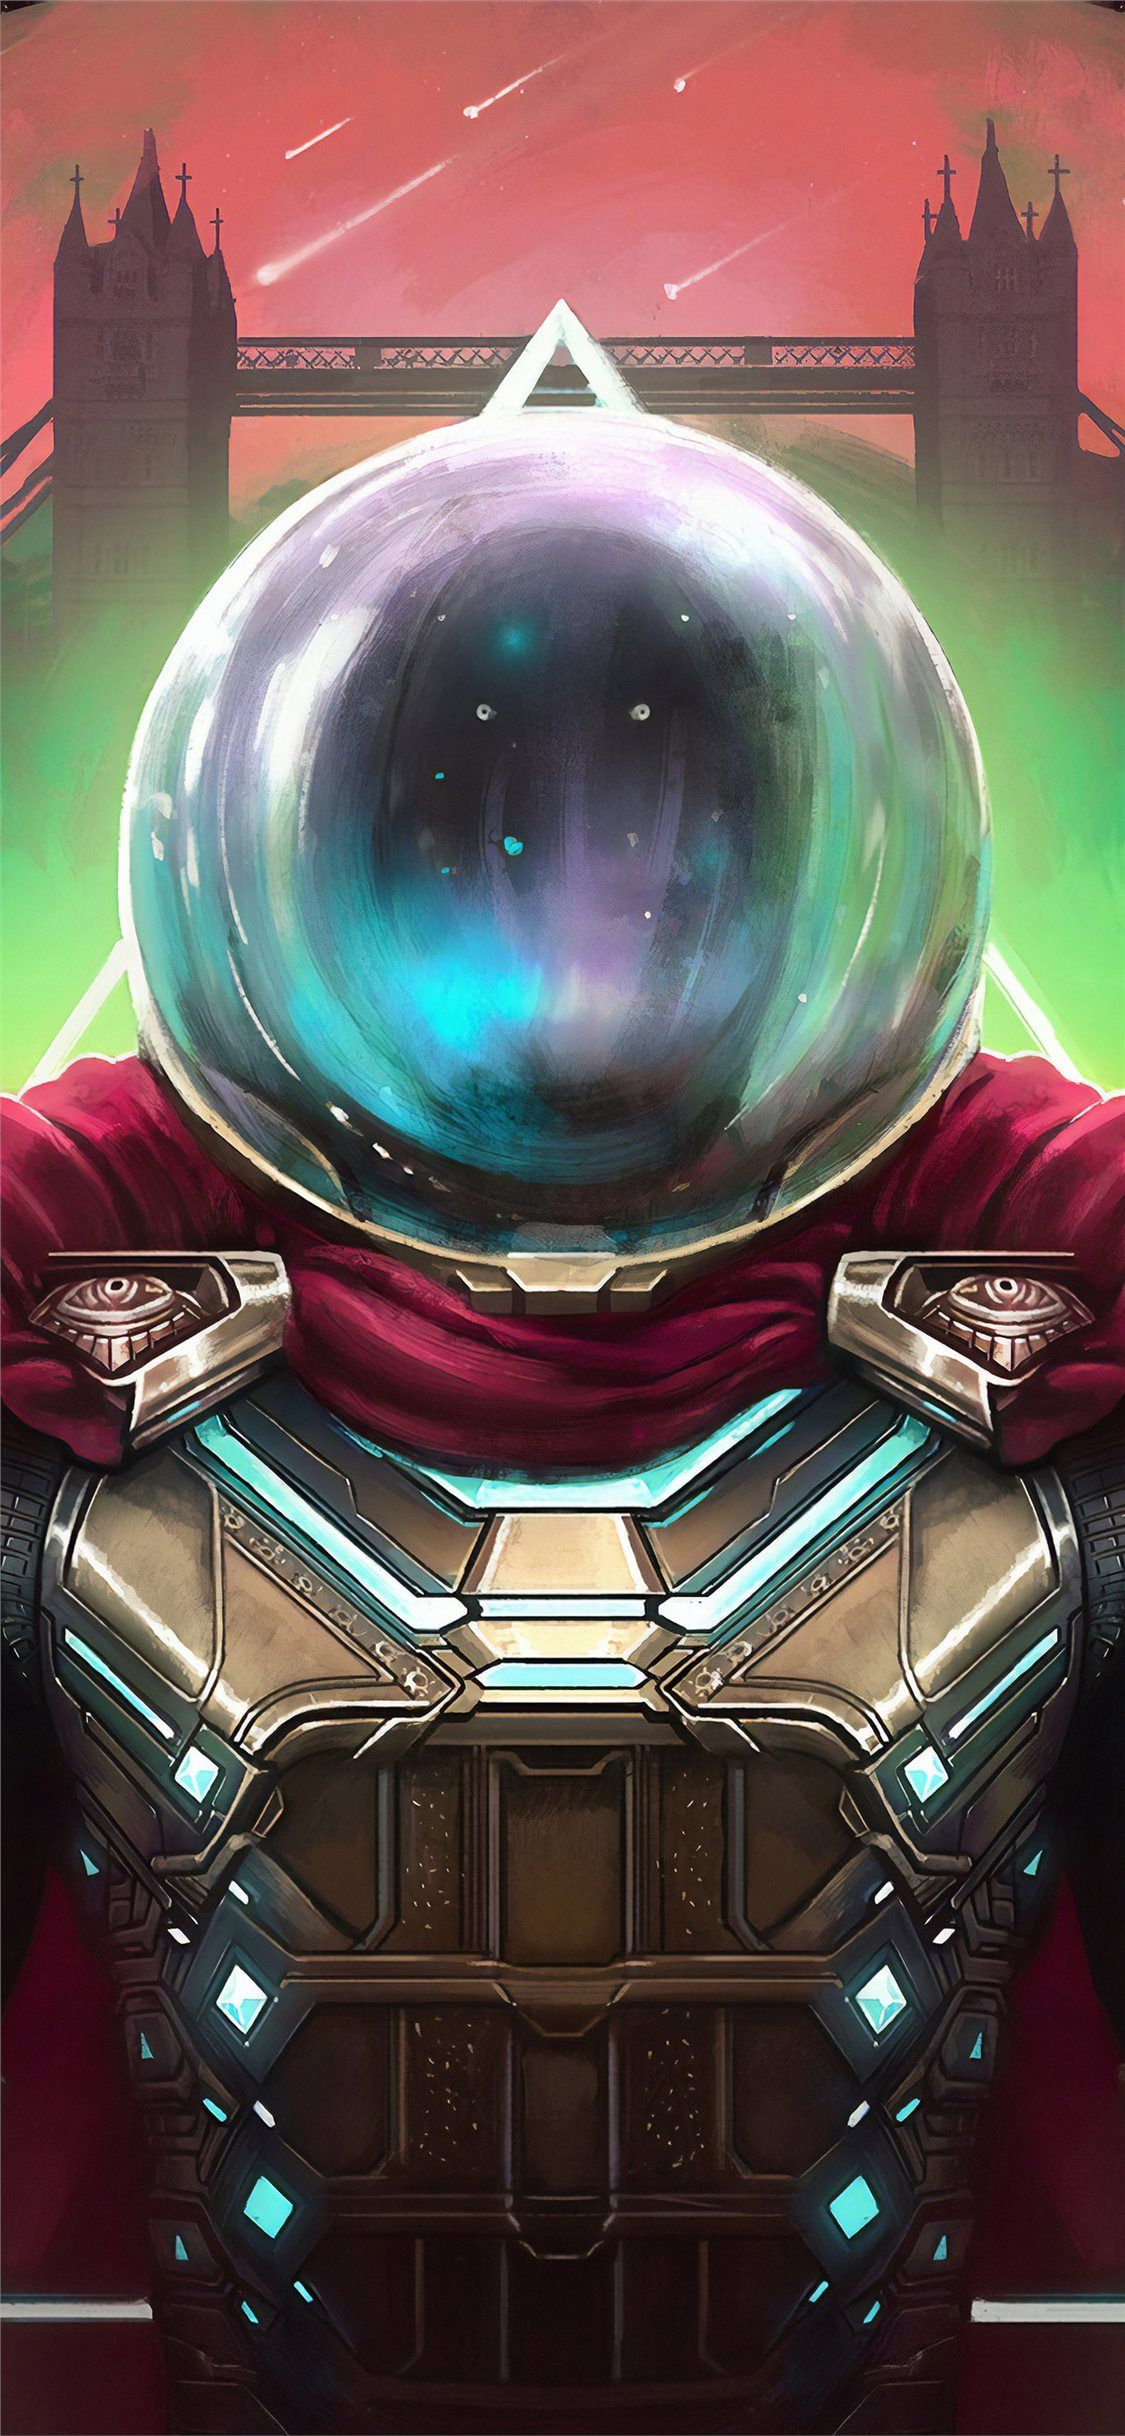 Mysterio In Spider-Man Far From Home Artwork Wallpapers